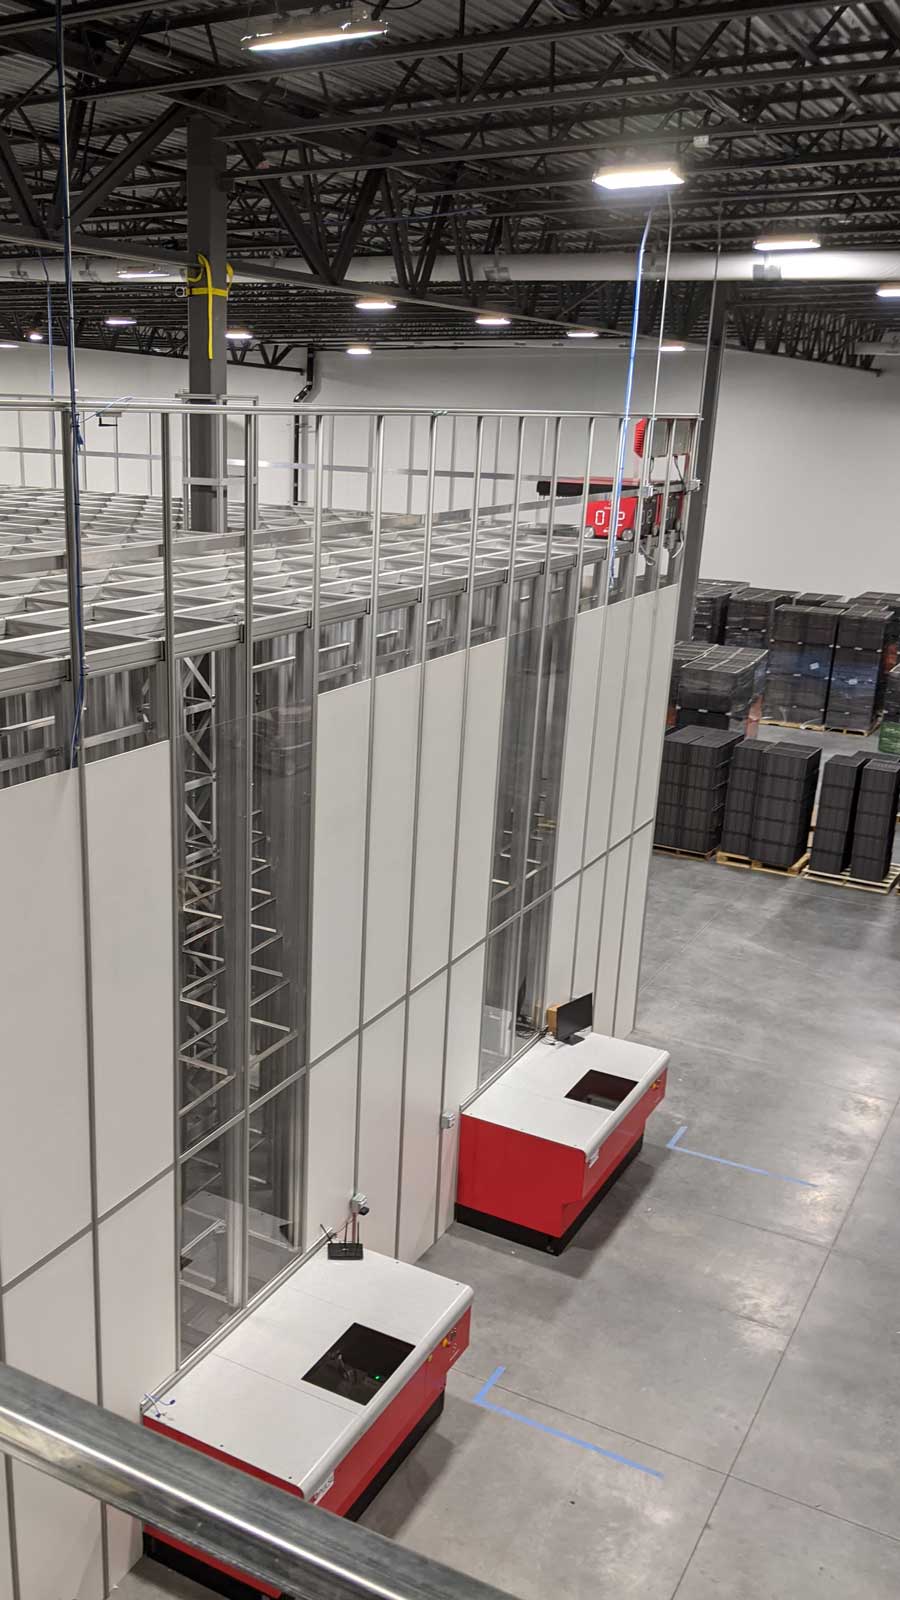 AutoStore grid and workstations in a retail distribution center